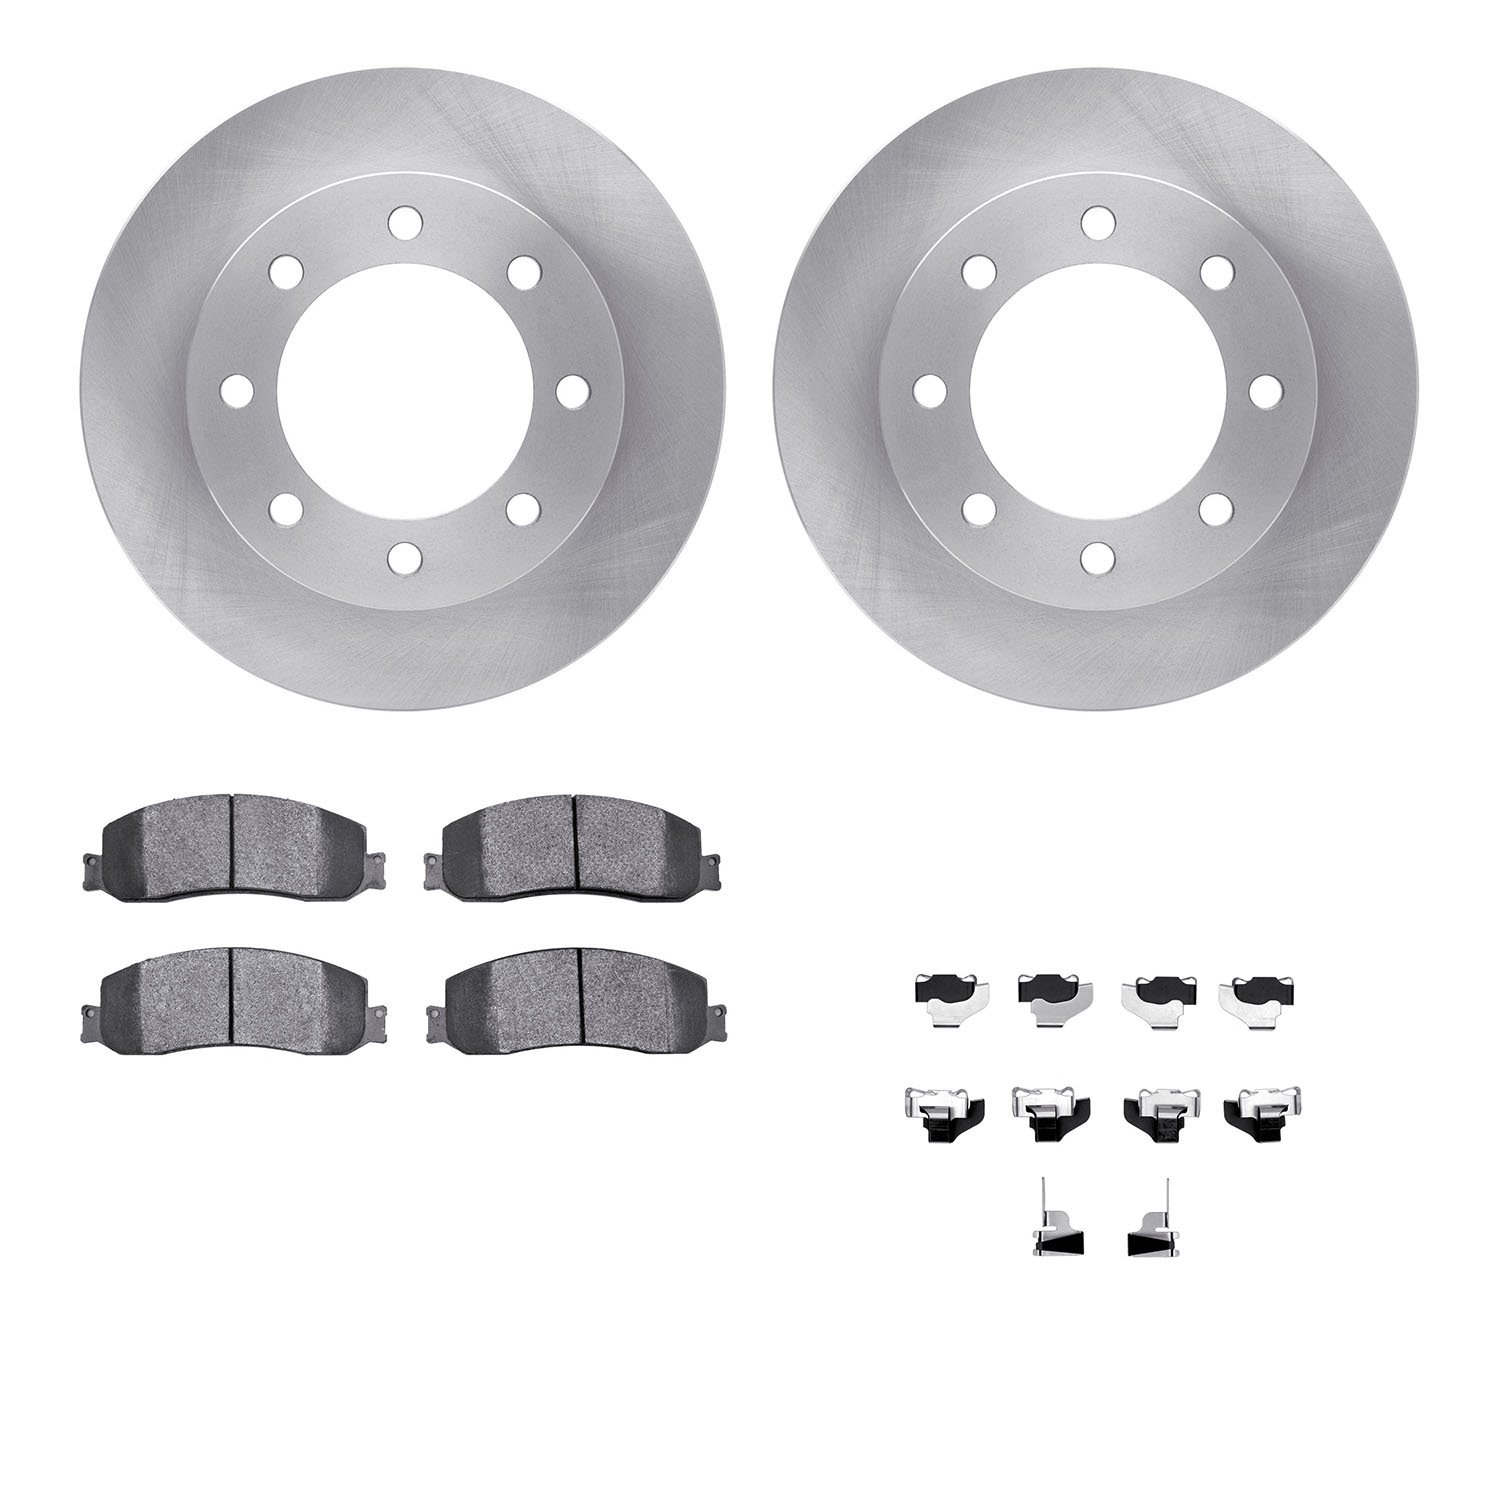 6412-54240 Brake Rotors with Ultimate-Duty Brake Pads Kit & Hardware, 2010-2012 Ford/Lincoln/Mercury/Mazda, Position: Front